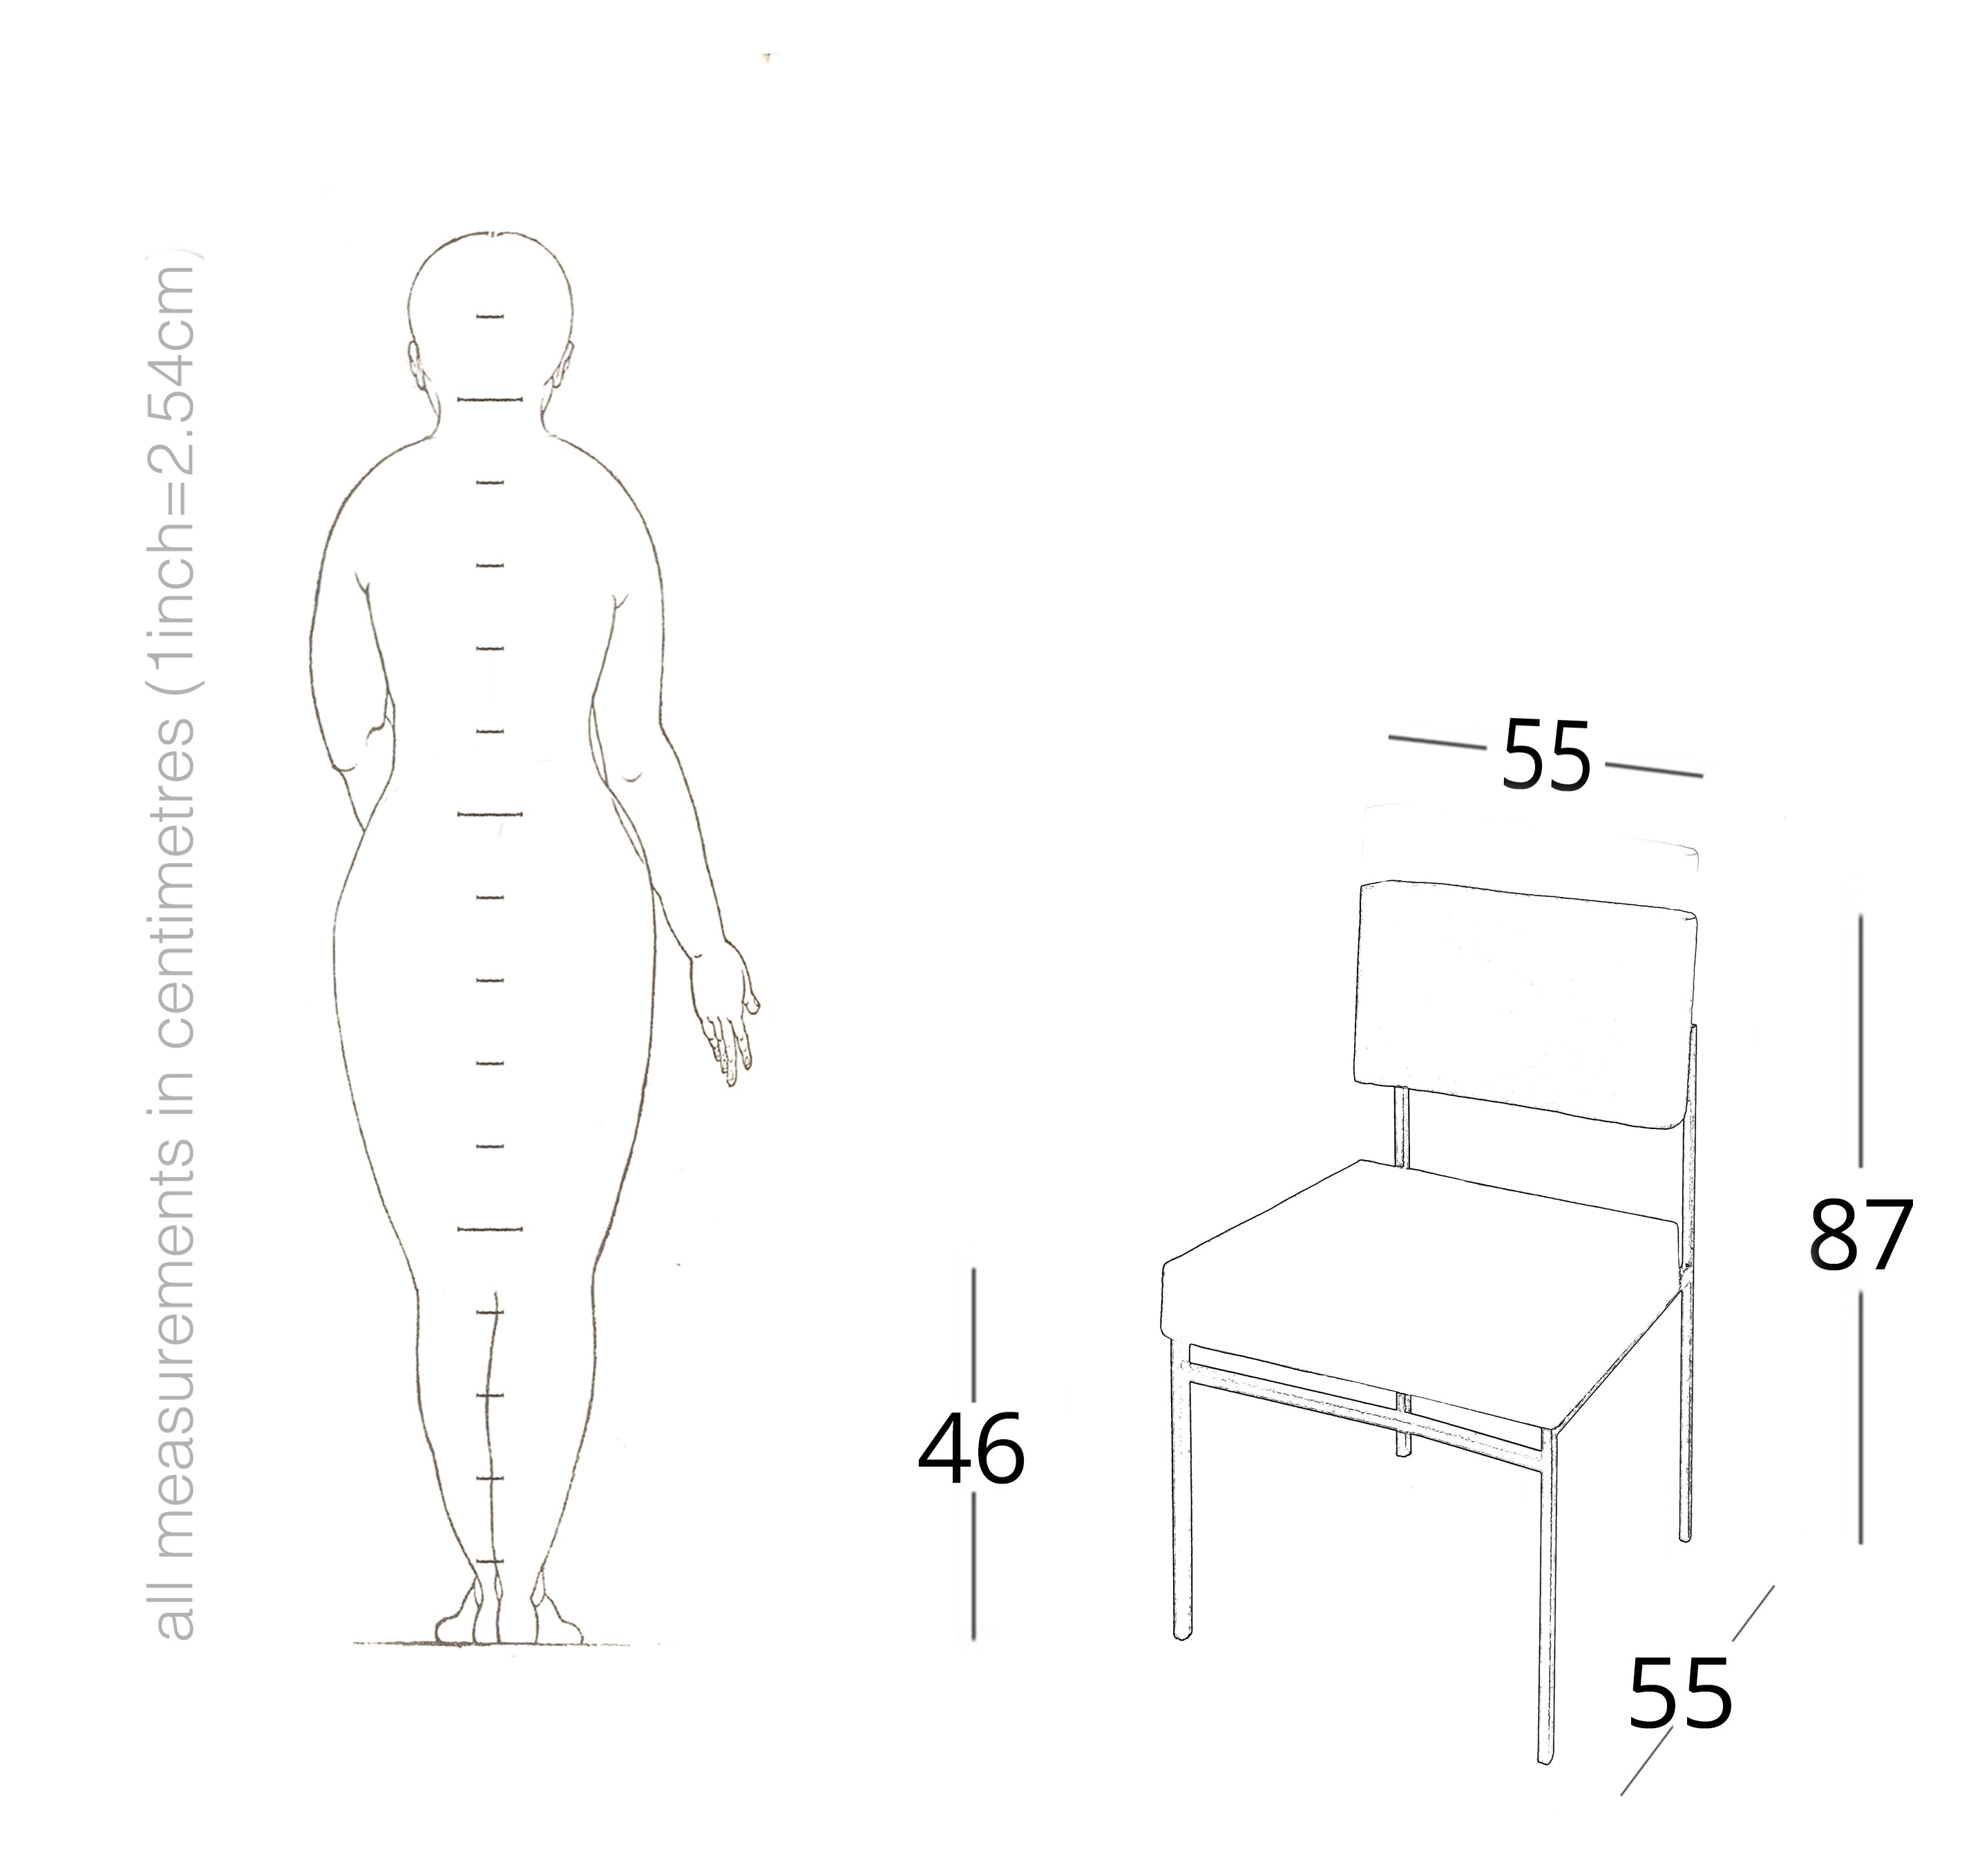 aurea restaurant dining chair - measurements and drawing